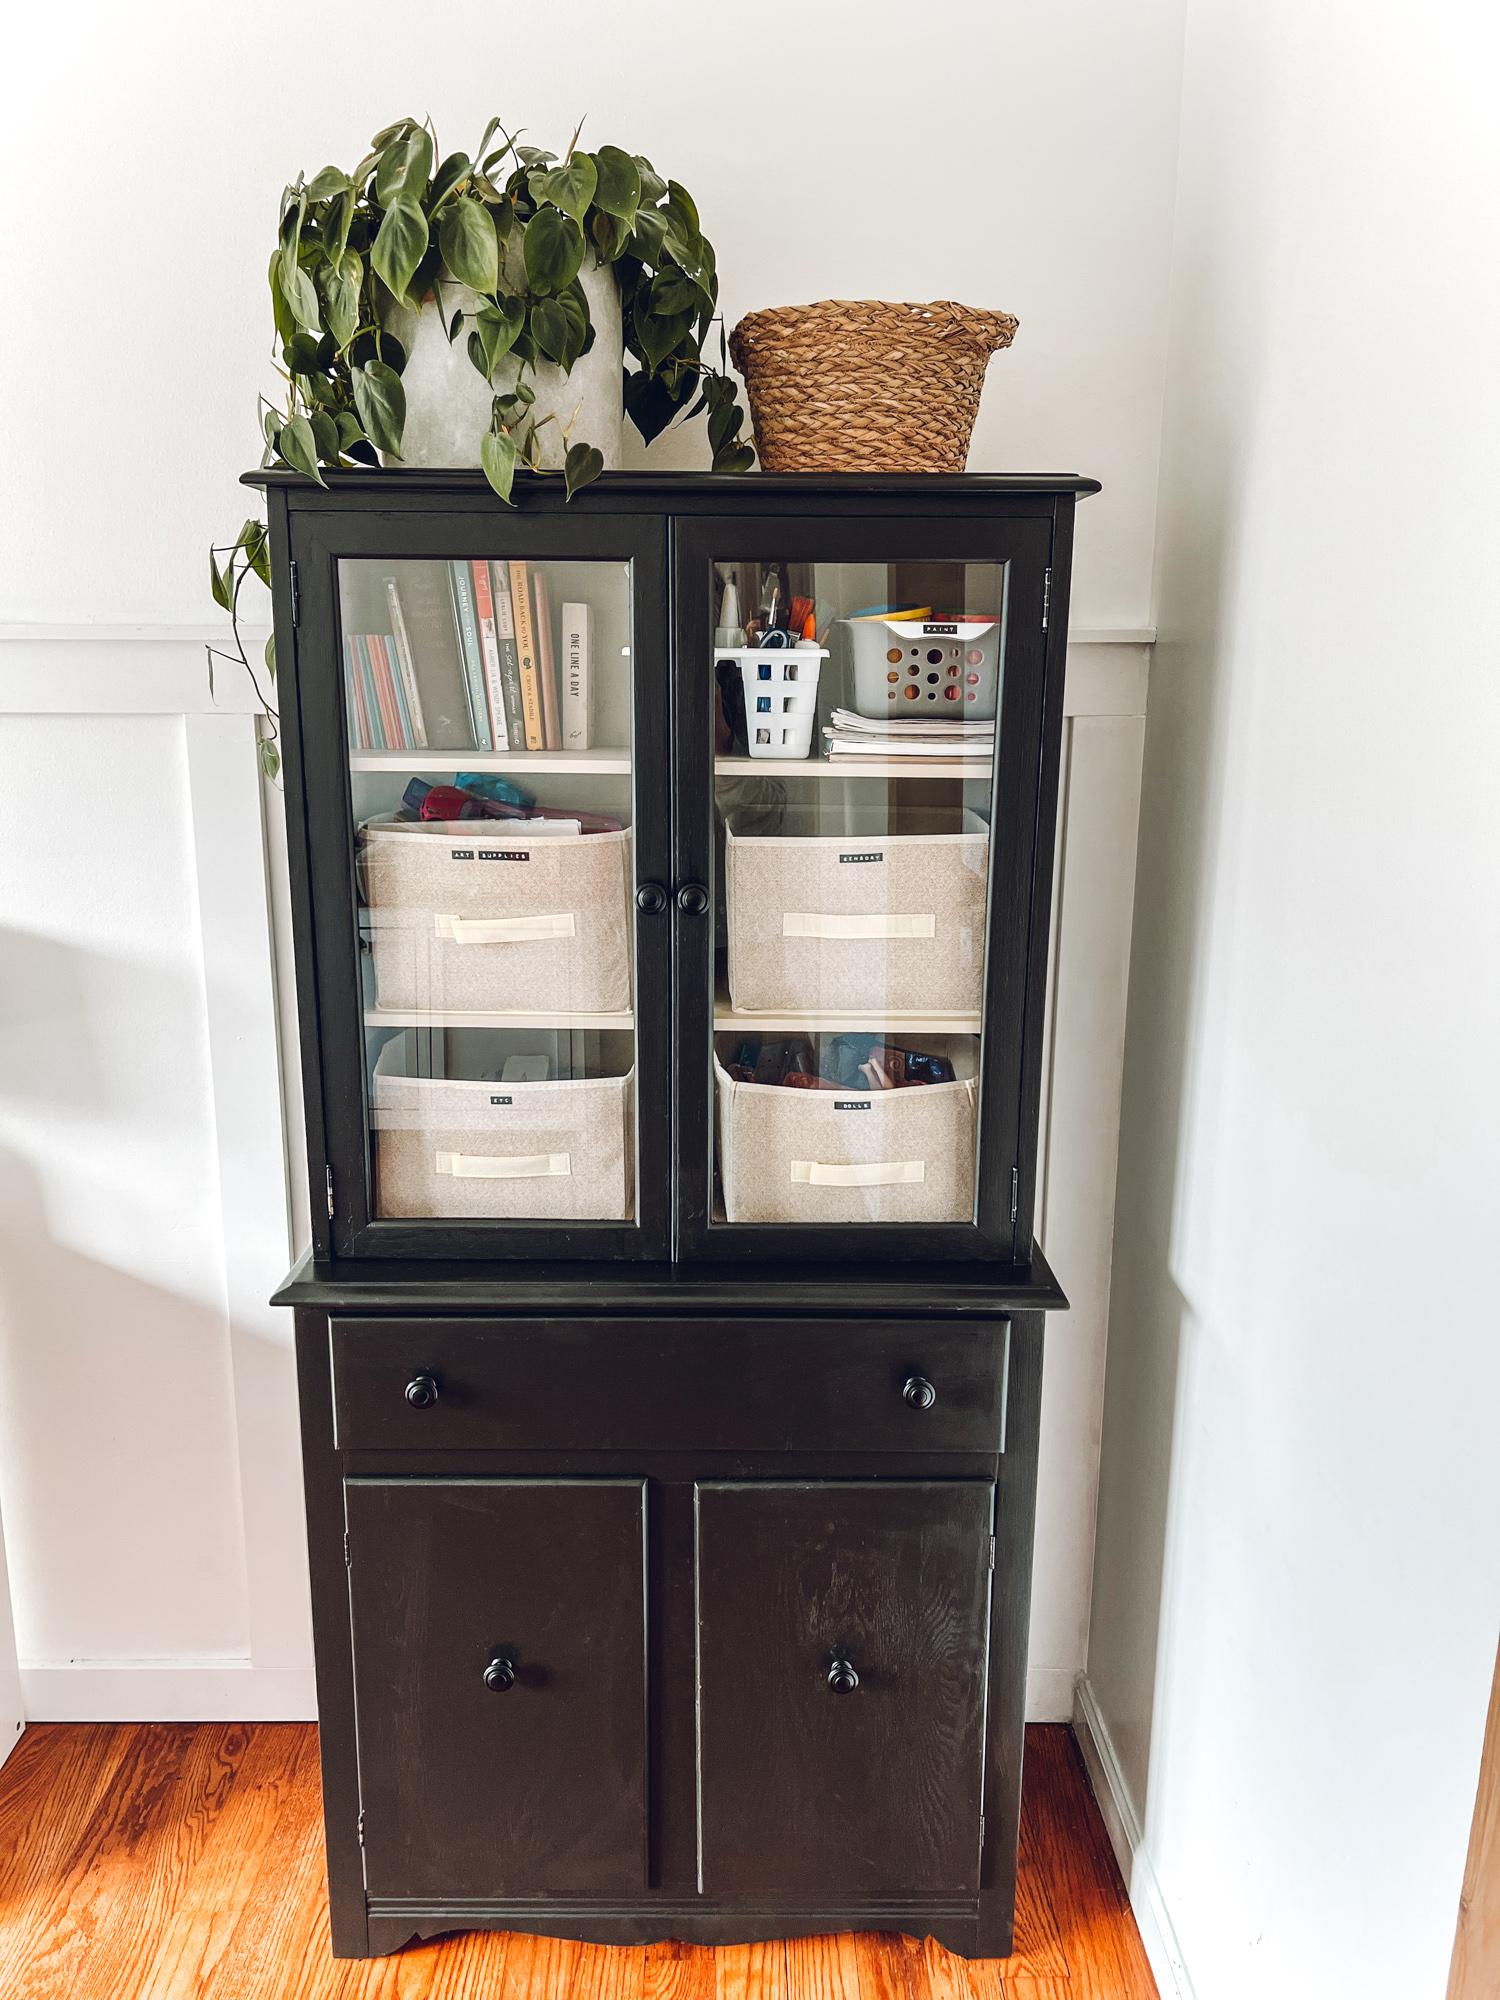 How to Repurpose an Old China Cabinet or Hutch